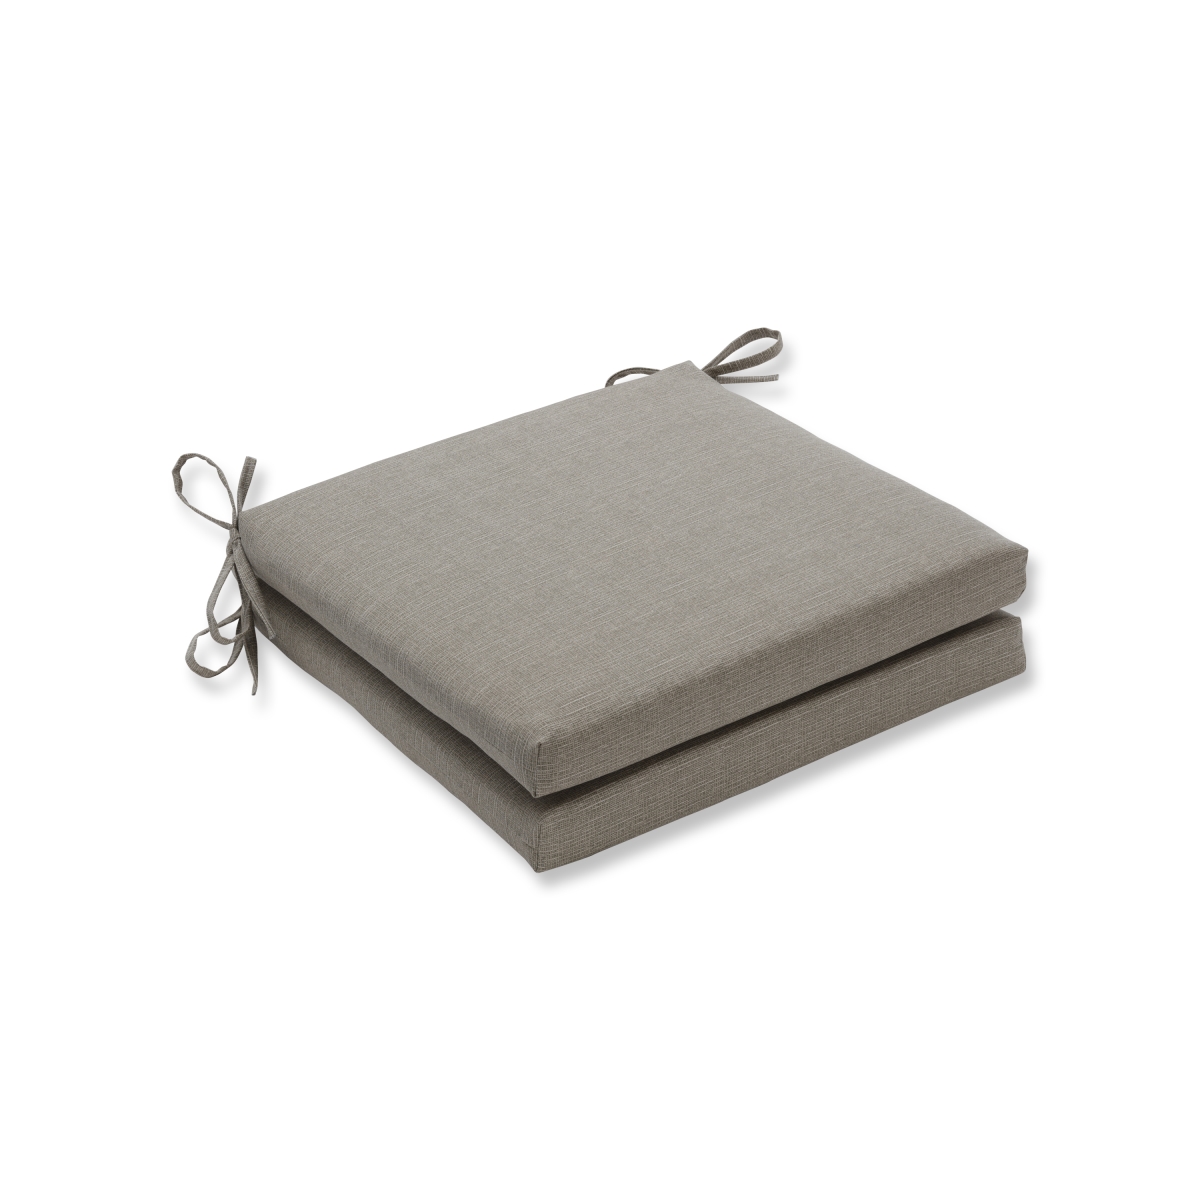 614977 20 X 20 X 3 In. Outdoor & Indoor Monti Chino Squared Corners Seat Cushion, Tan - Set Of 2